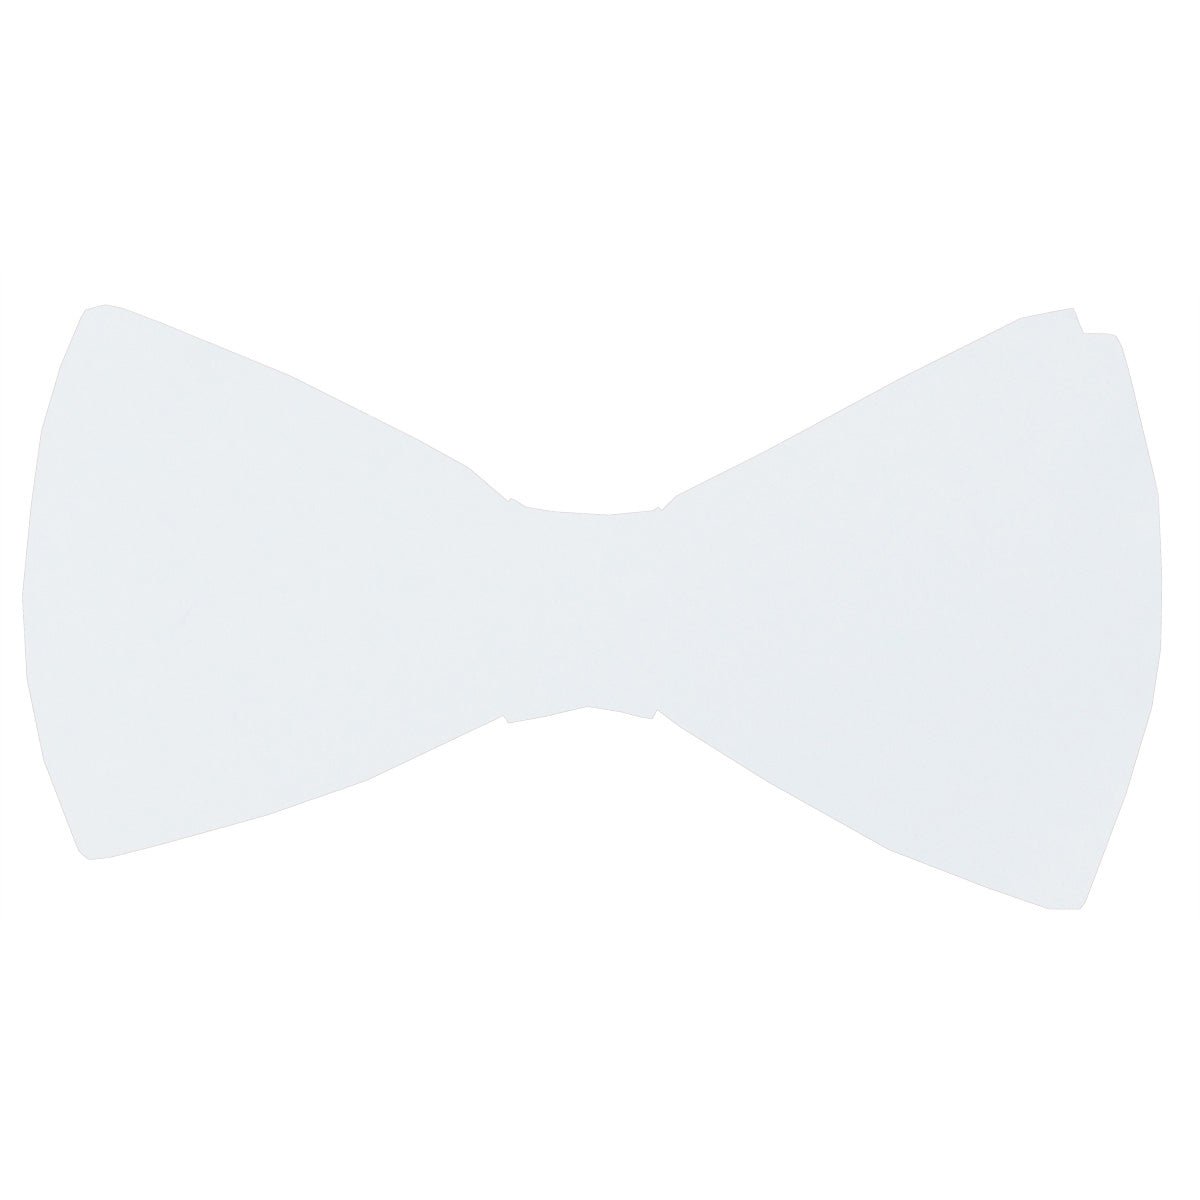 Crisp White Bow Ties - Wedding Bow Tie - Pre-Tied - Swagger & Swoon